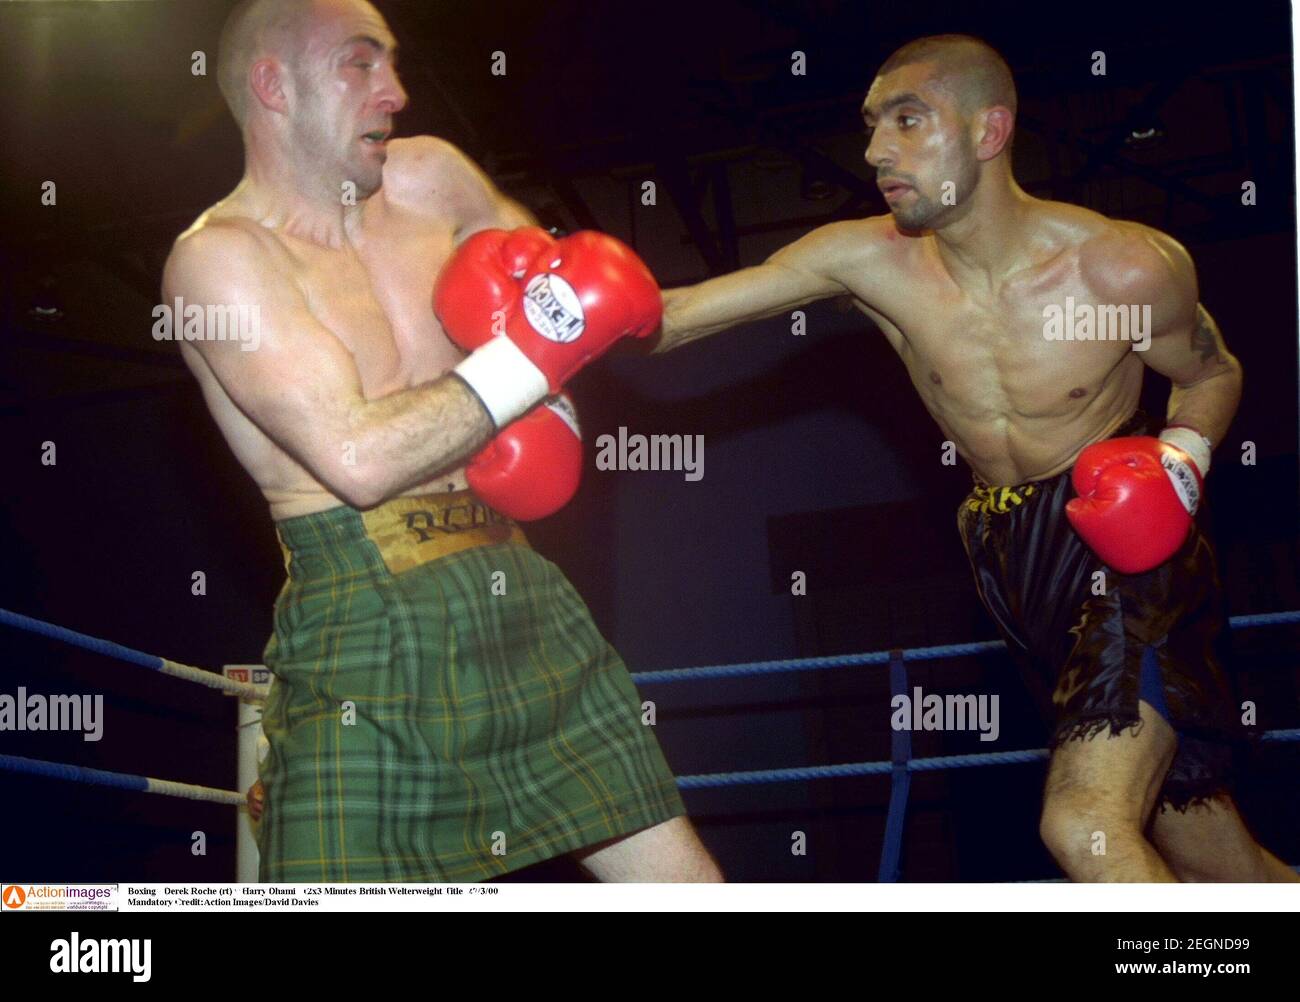 Boxing - Derek Roche (lt) v Harry Dhami , 12x3 Minutes British Welterweight  Title 27/3/00 Mandatory Credit:Action Images/David Davies Stock Photo -  Alamy